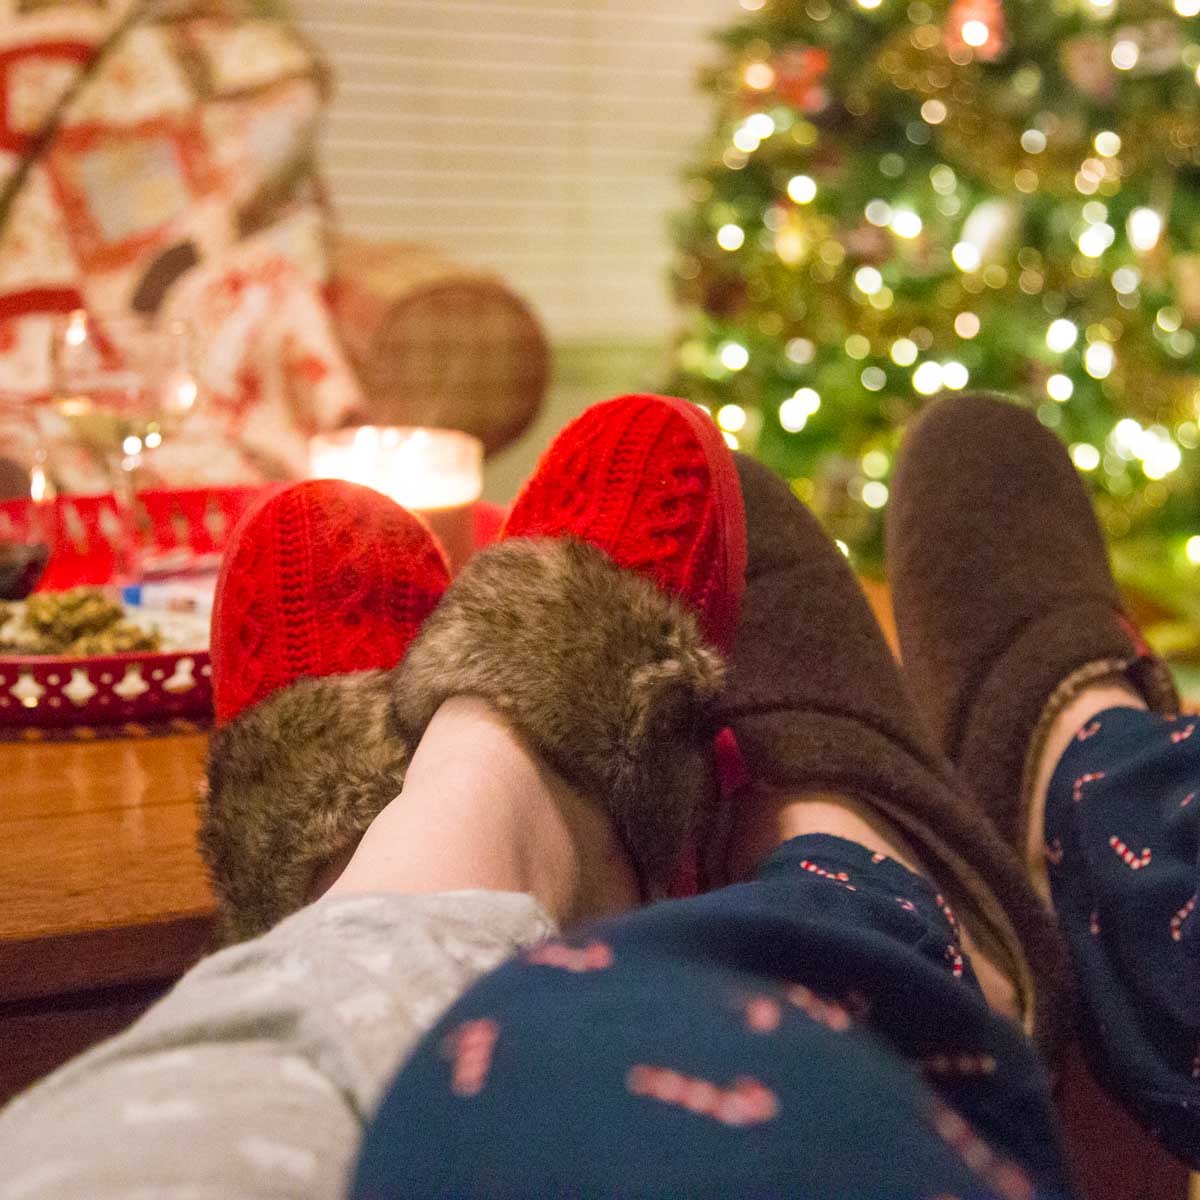 A husband and wife wearing cozy slippers snuggle by the Christmas tree.